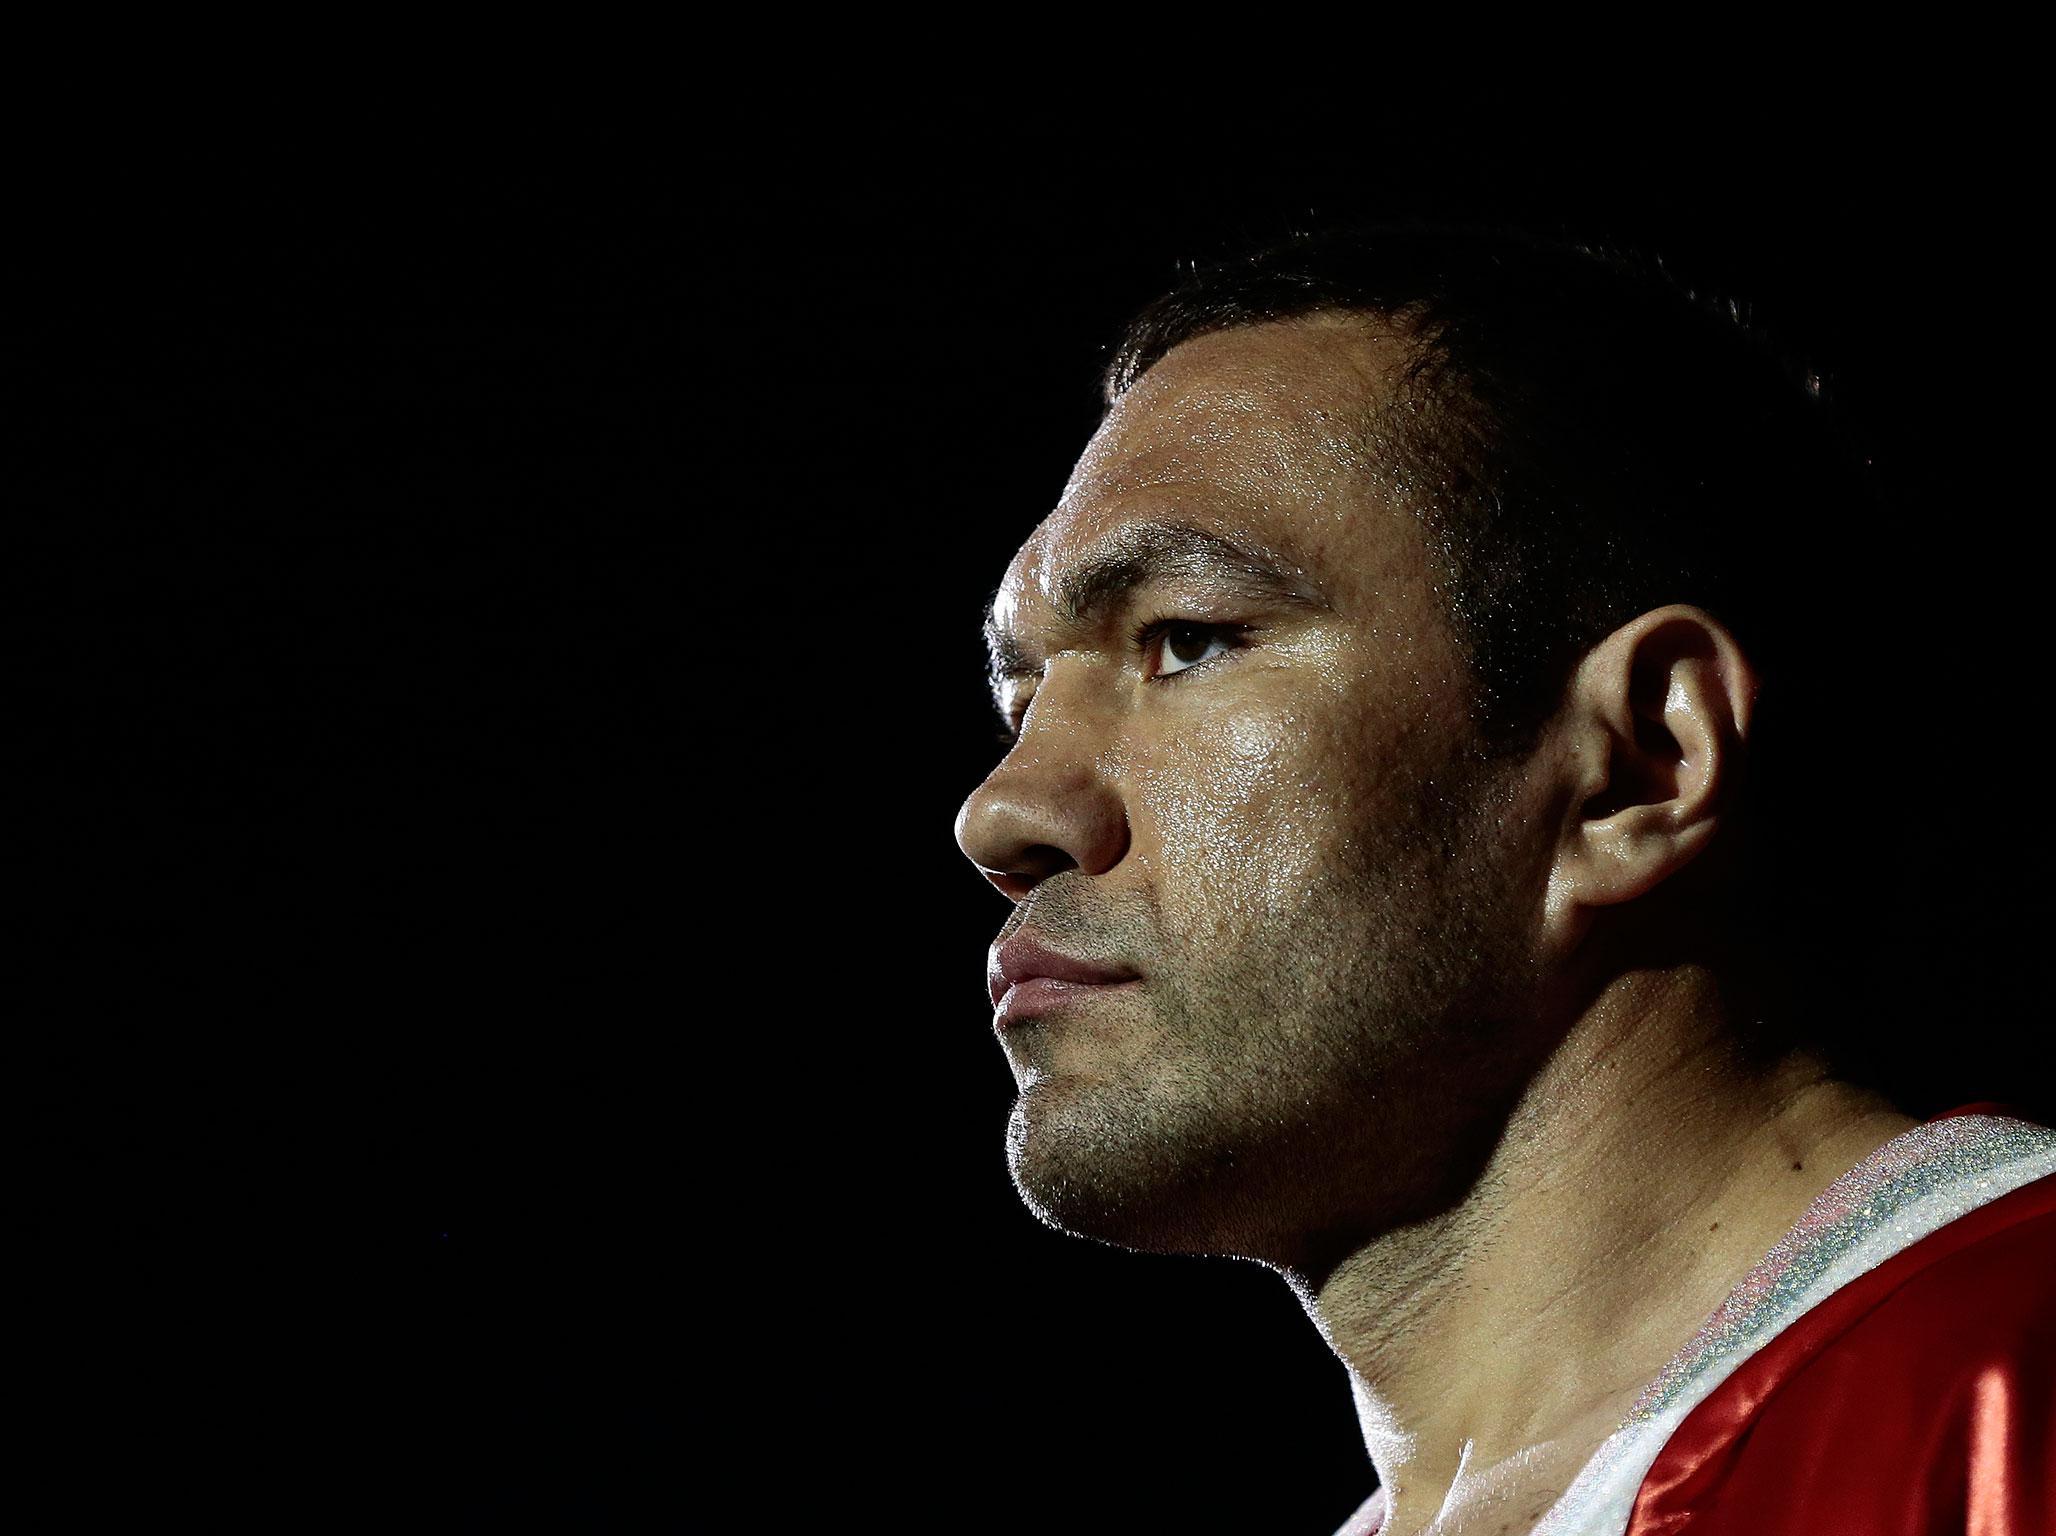 Make no mistake Kubrat Pulev is a dangerous opponent for Anthony Joshua